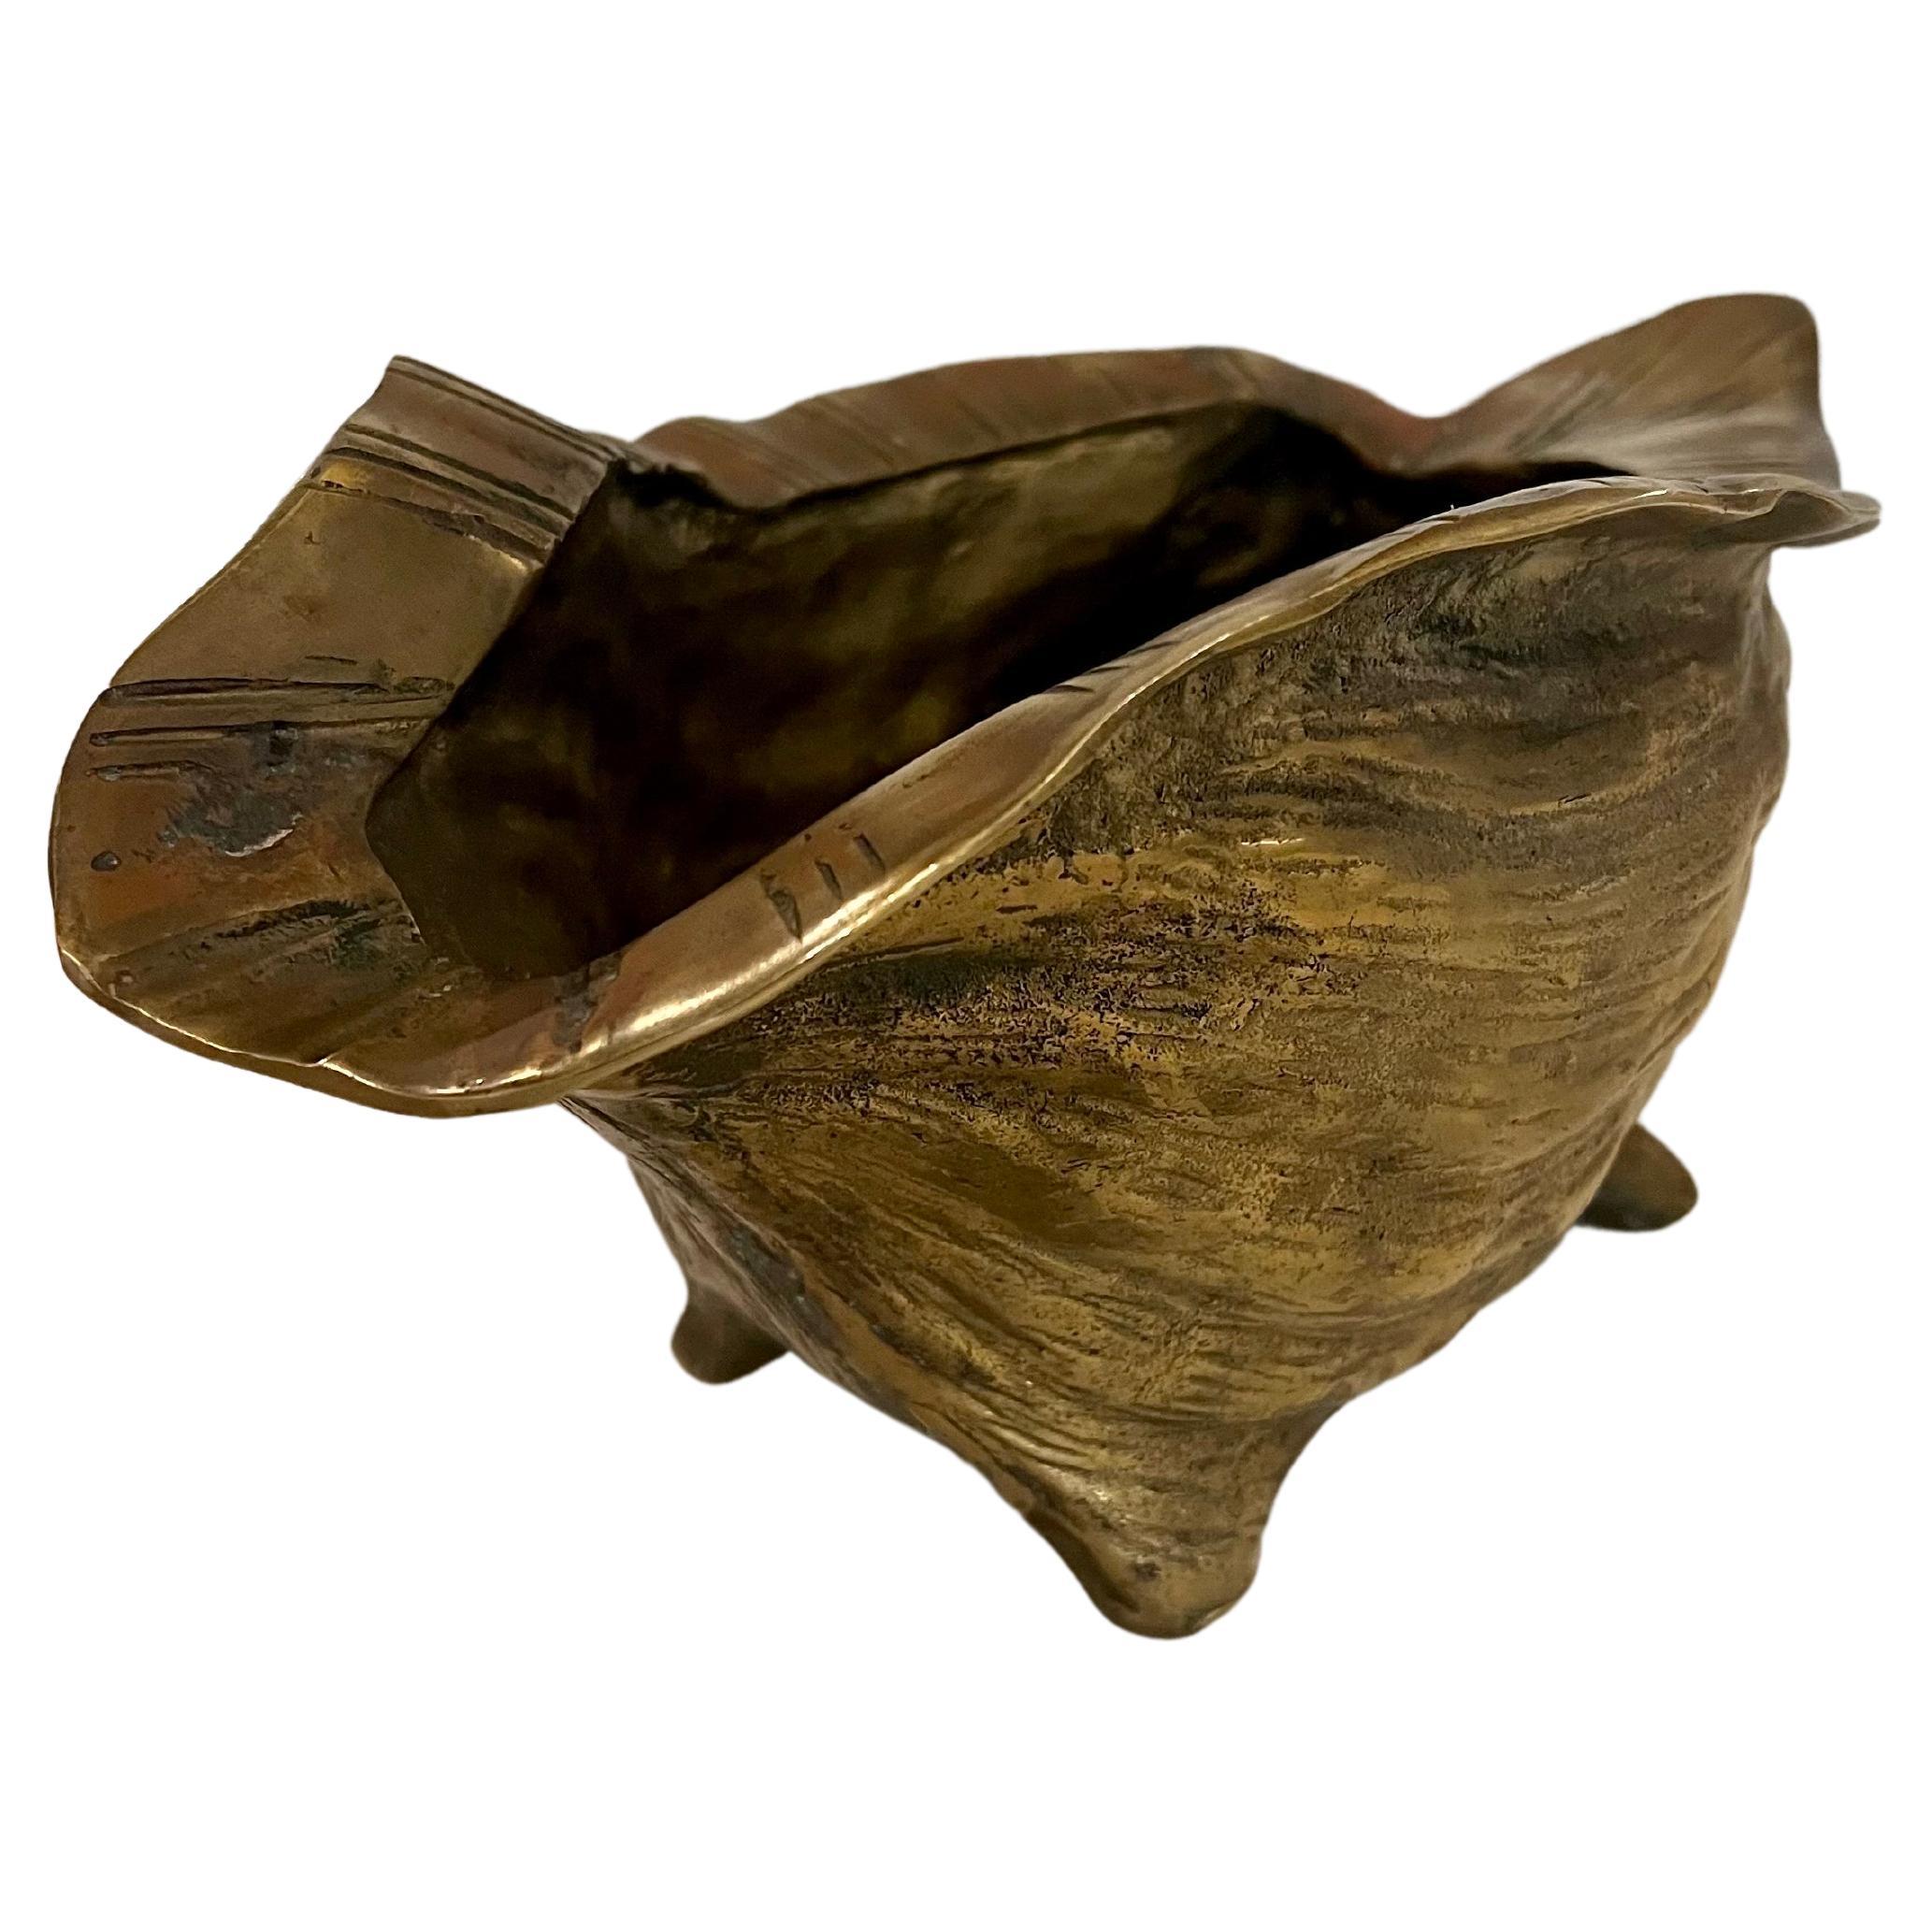 Hollywood Regency Solid Patinated Brass Seashell Conch Catch It All / Planter For Sale